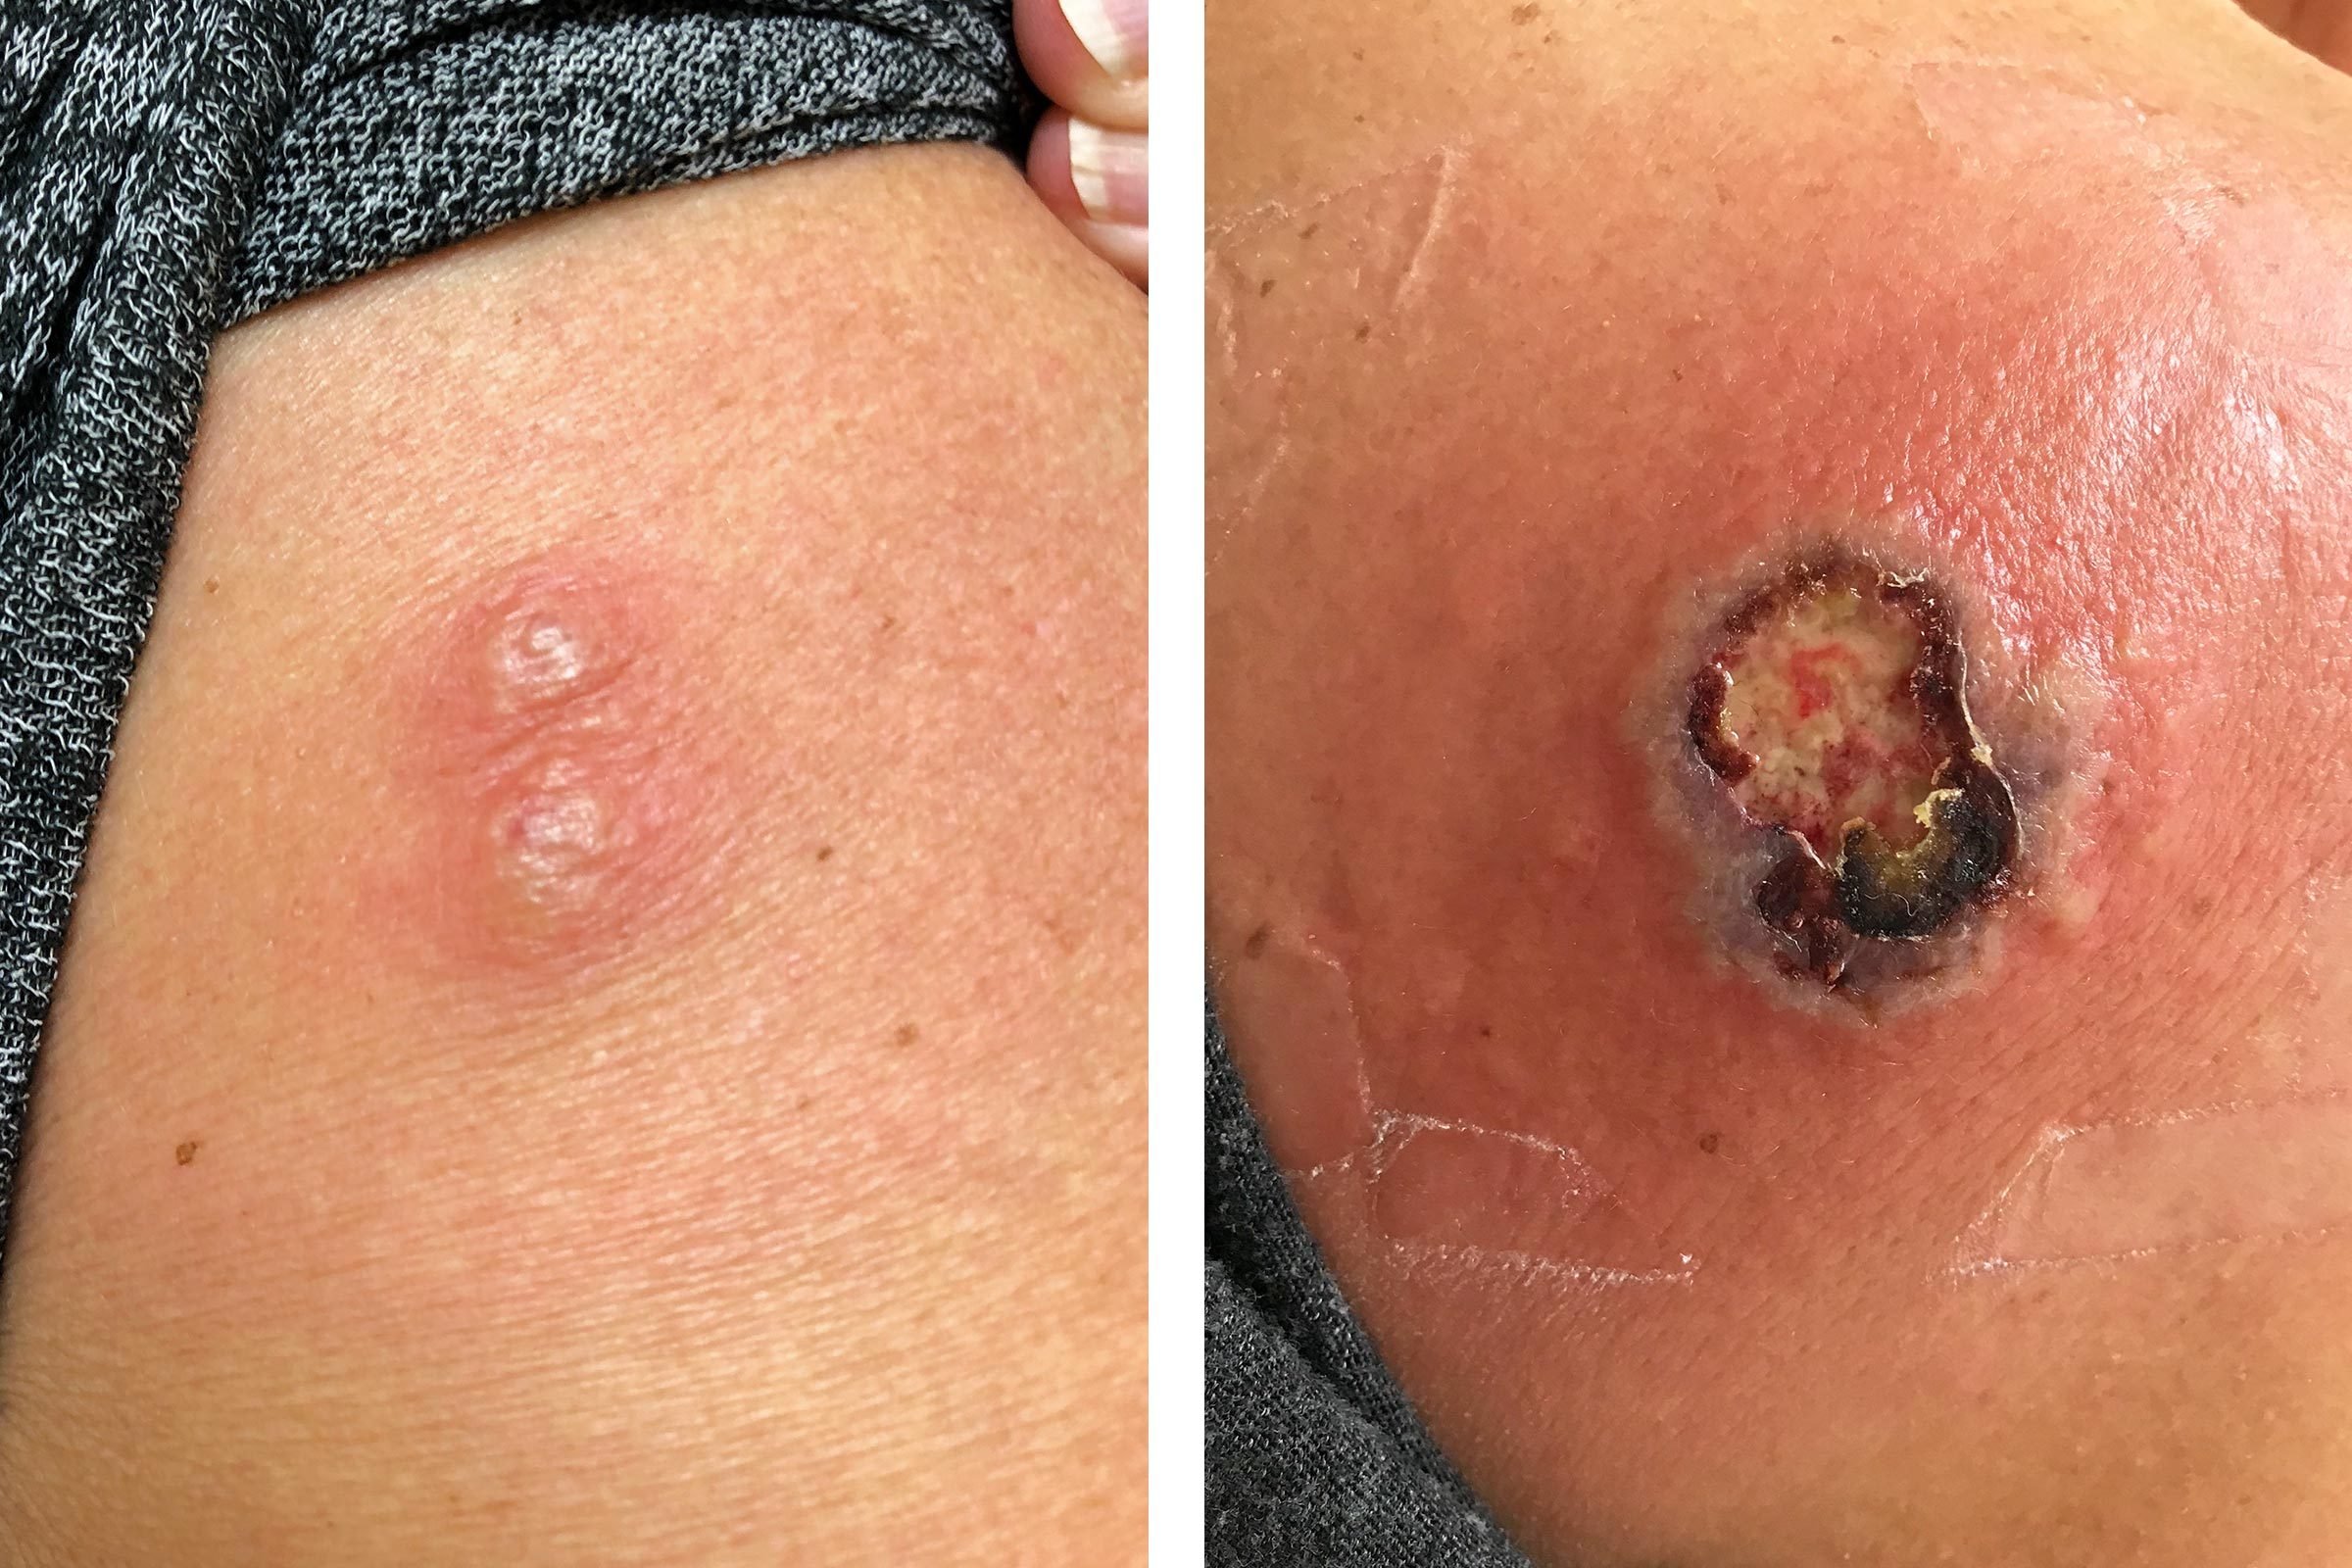 How One Woman Almost Died from Two "Spider Bites"